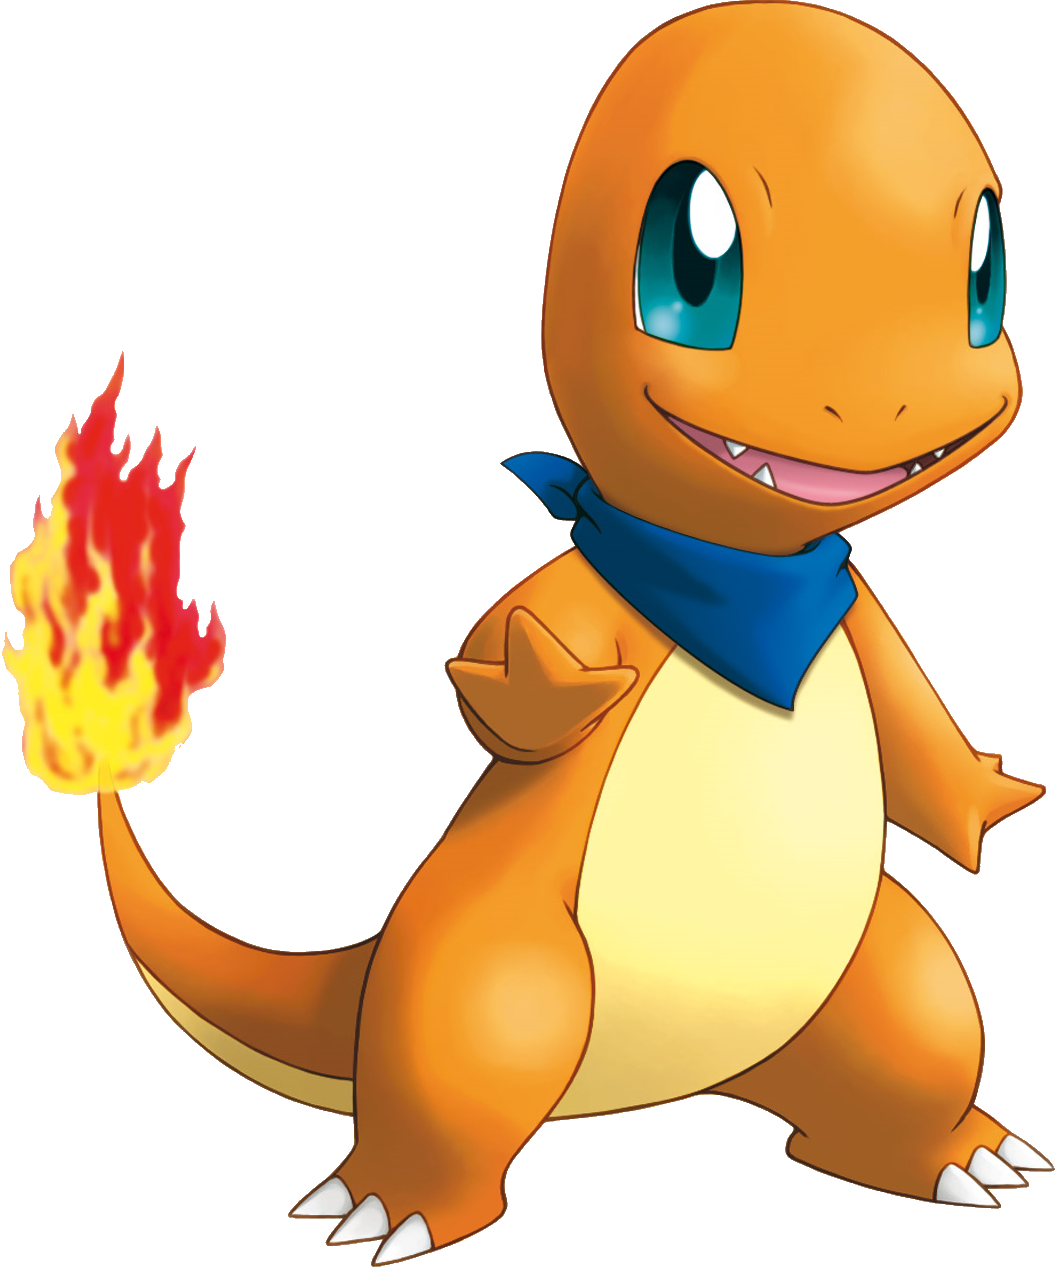 004Charmander_Pokemon_Mystery_Dungeon_Explorers_of_Sky.png